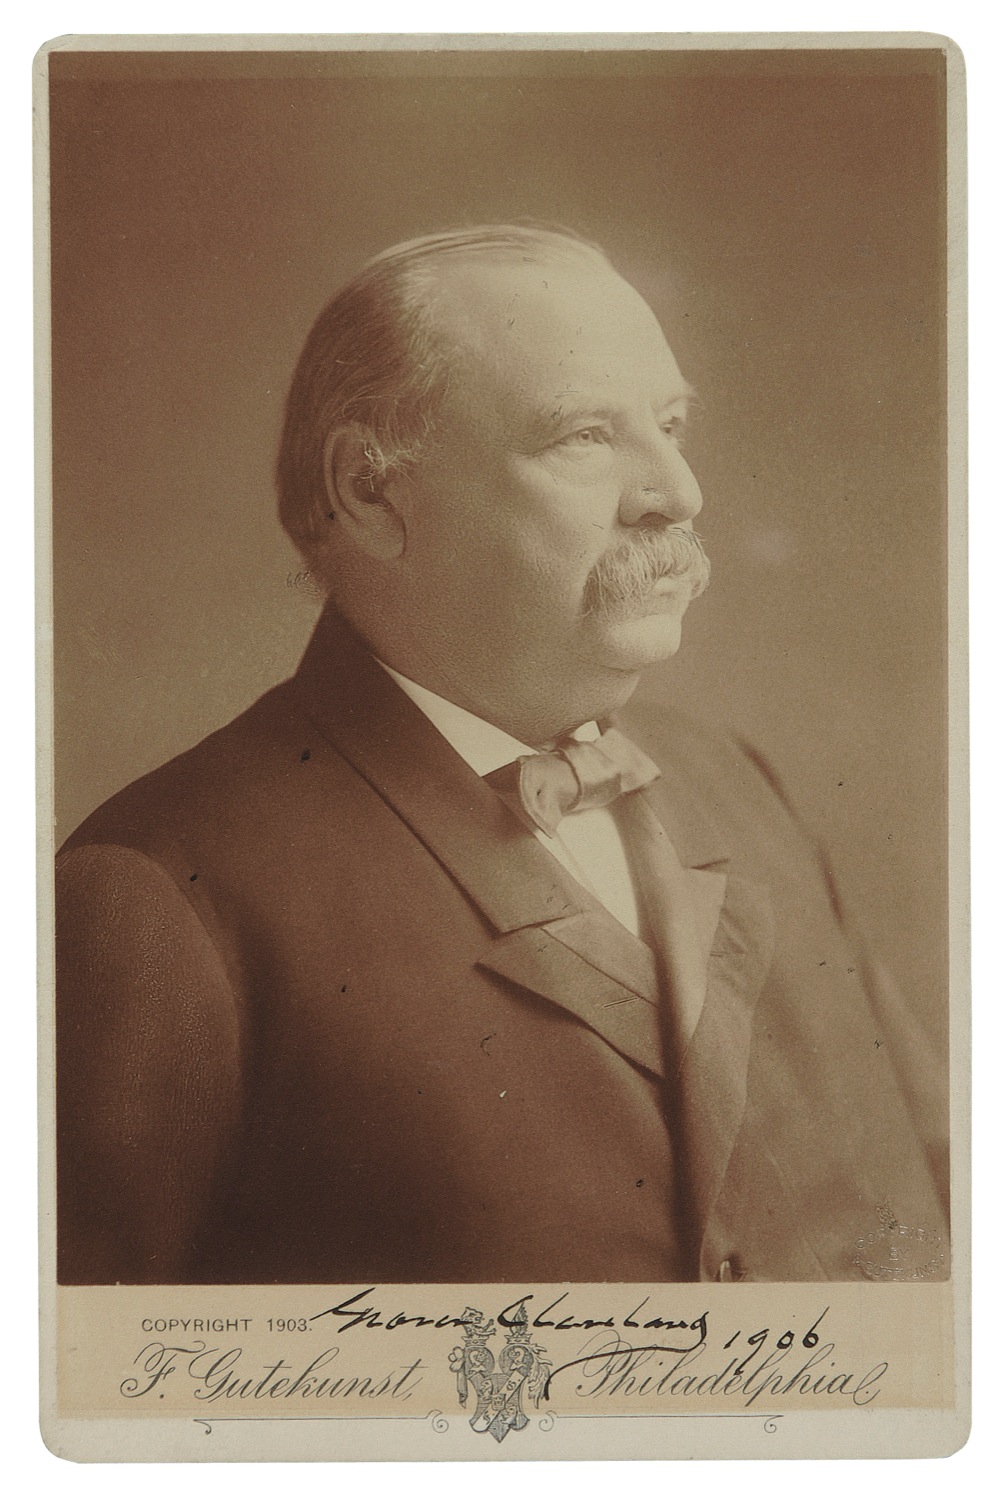 Lot #29 Grover Cleveland